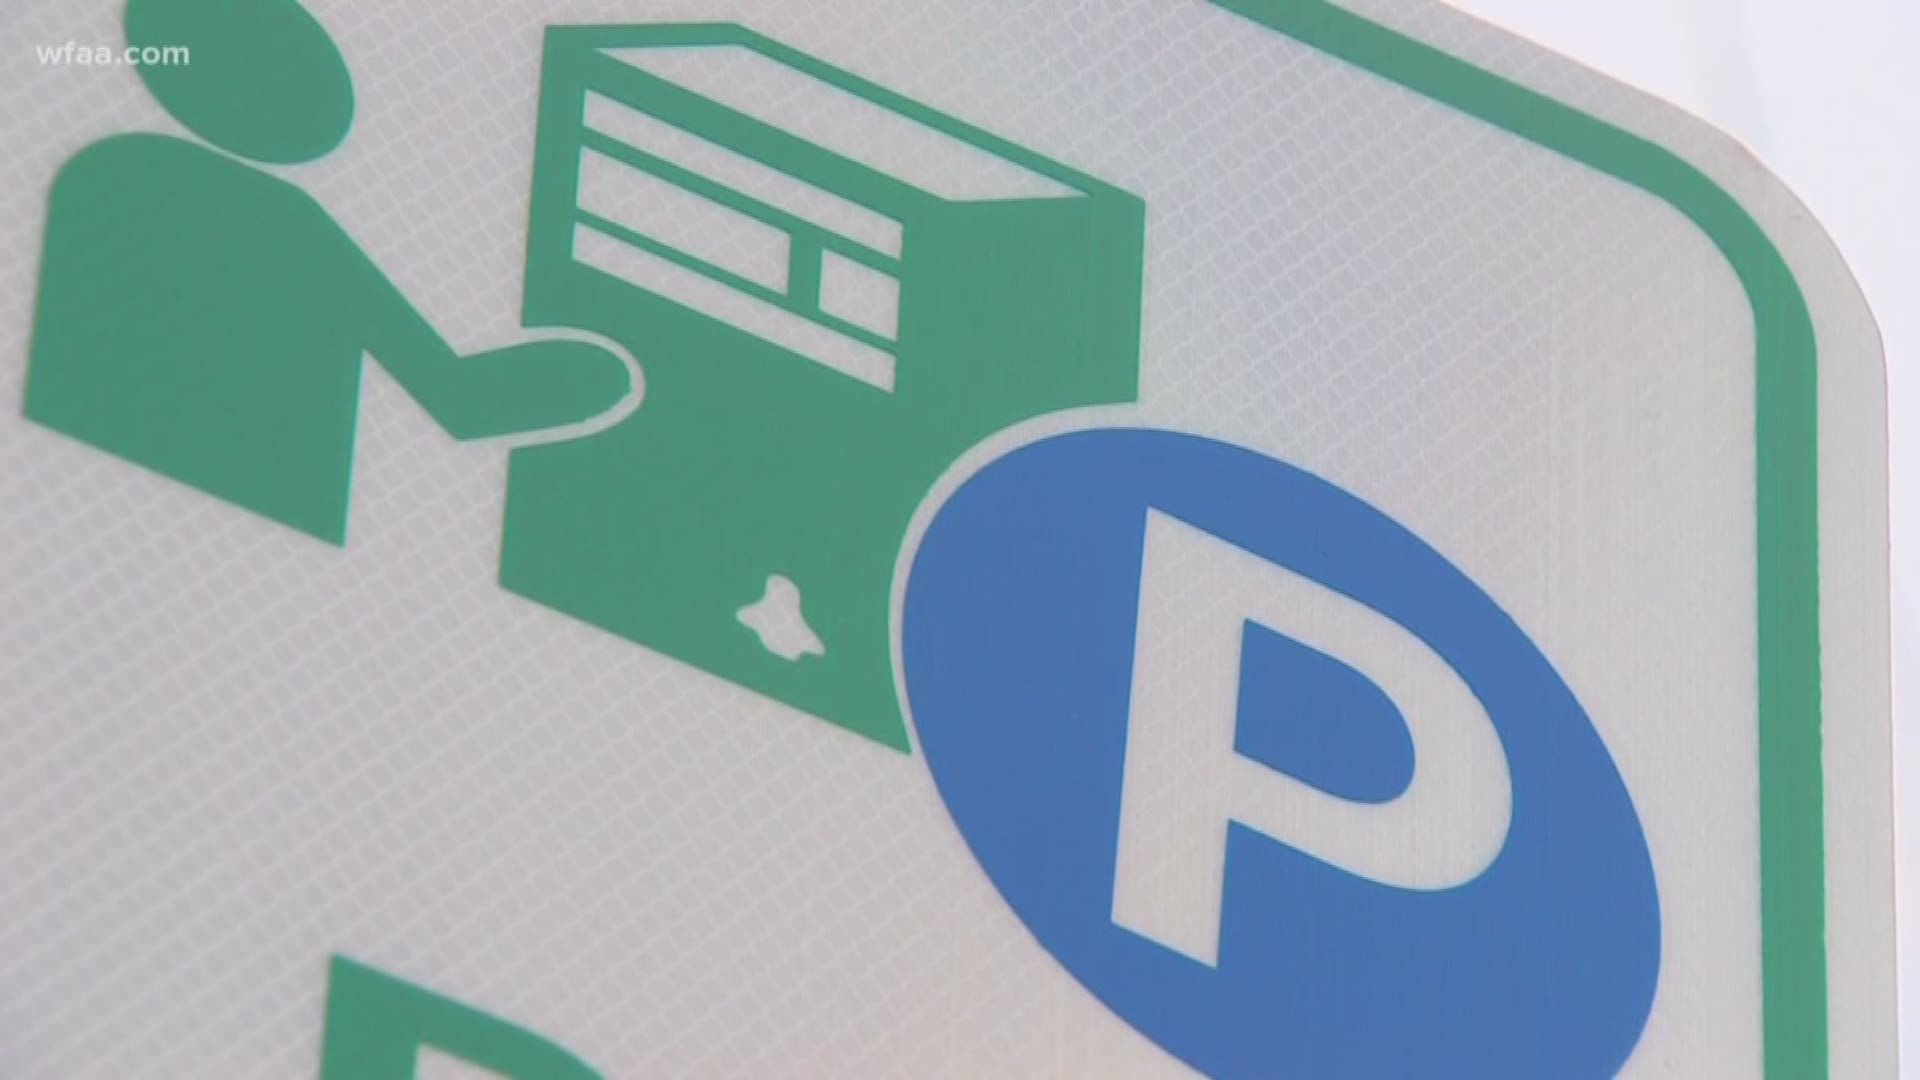 Business owners say customers don’t want to pay to park or risk getting a ticket.